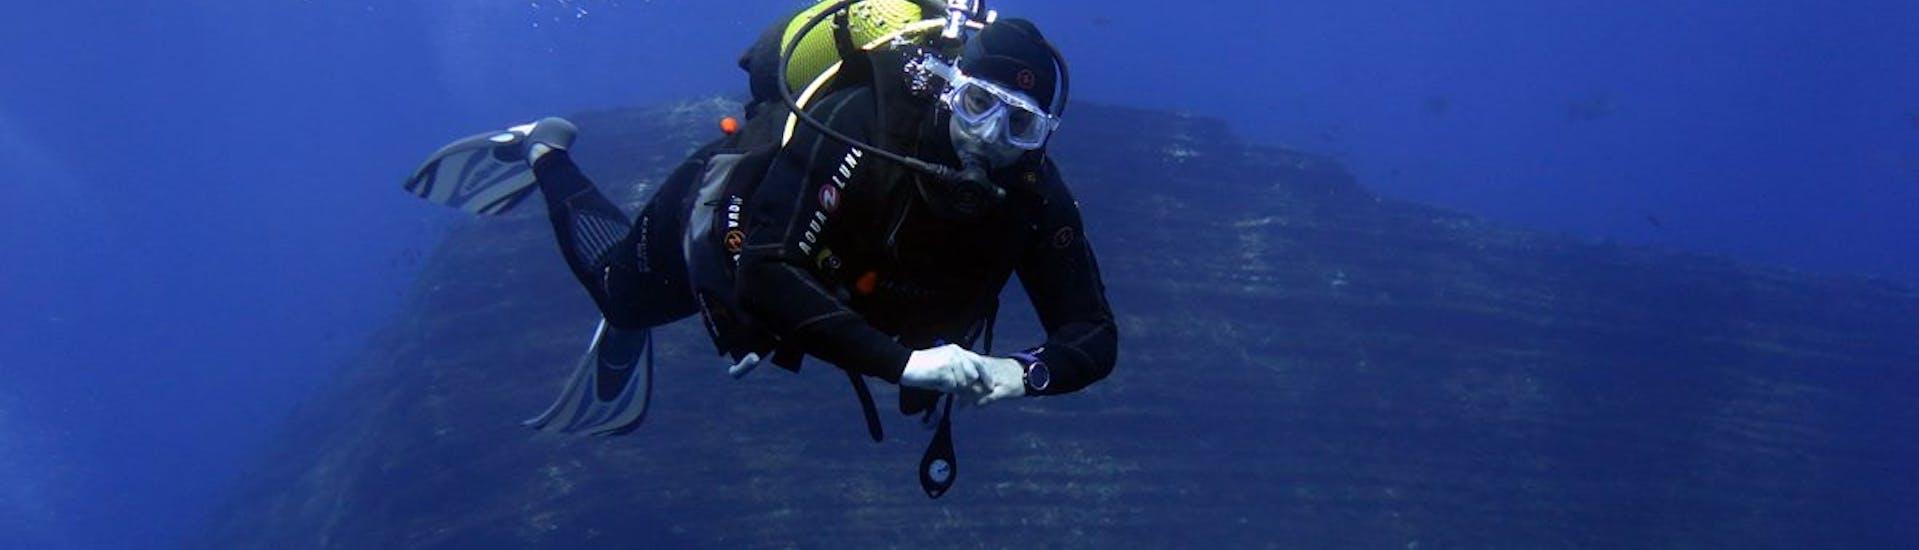 A diver during the Guided & Unguided Dive in Argelès-sur-Mer for Certified Divers from Magellan Plongée Argelès-sur-Mer.